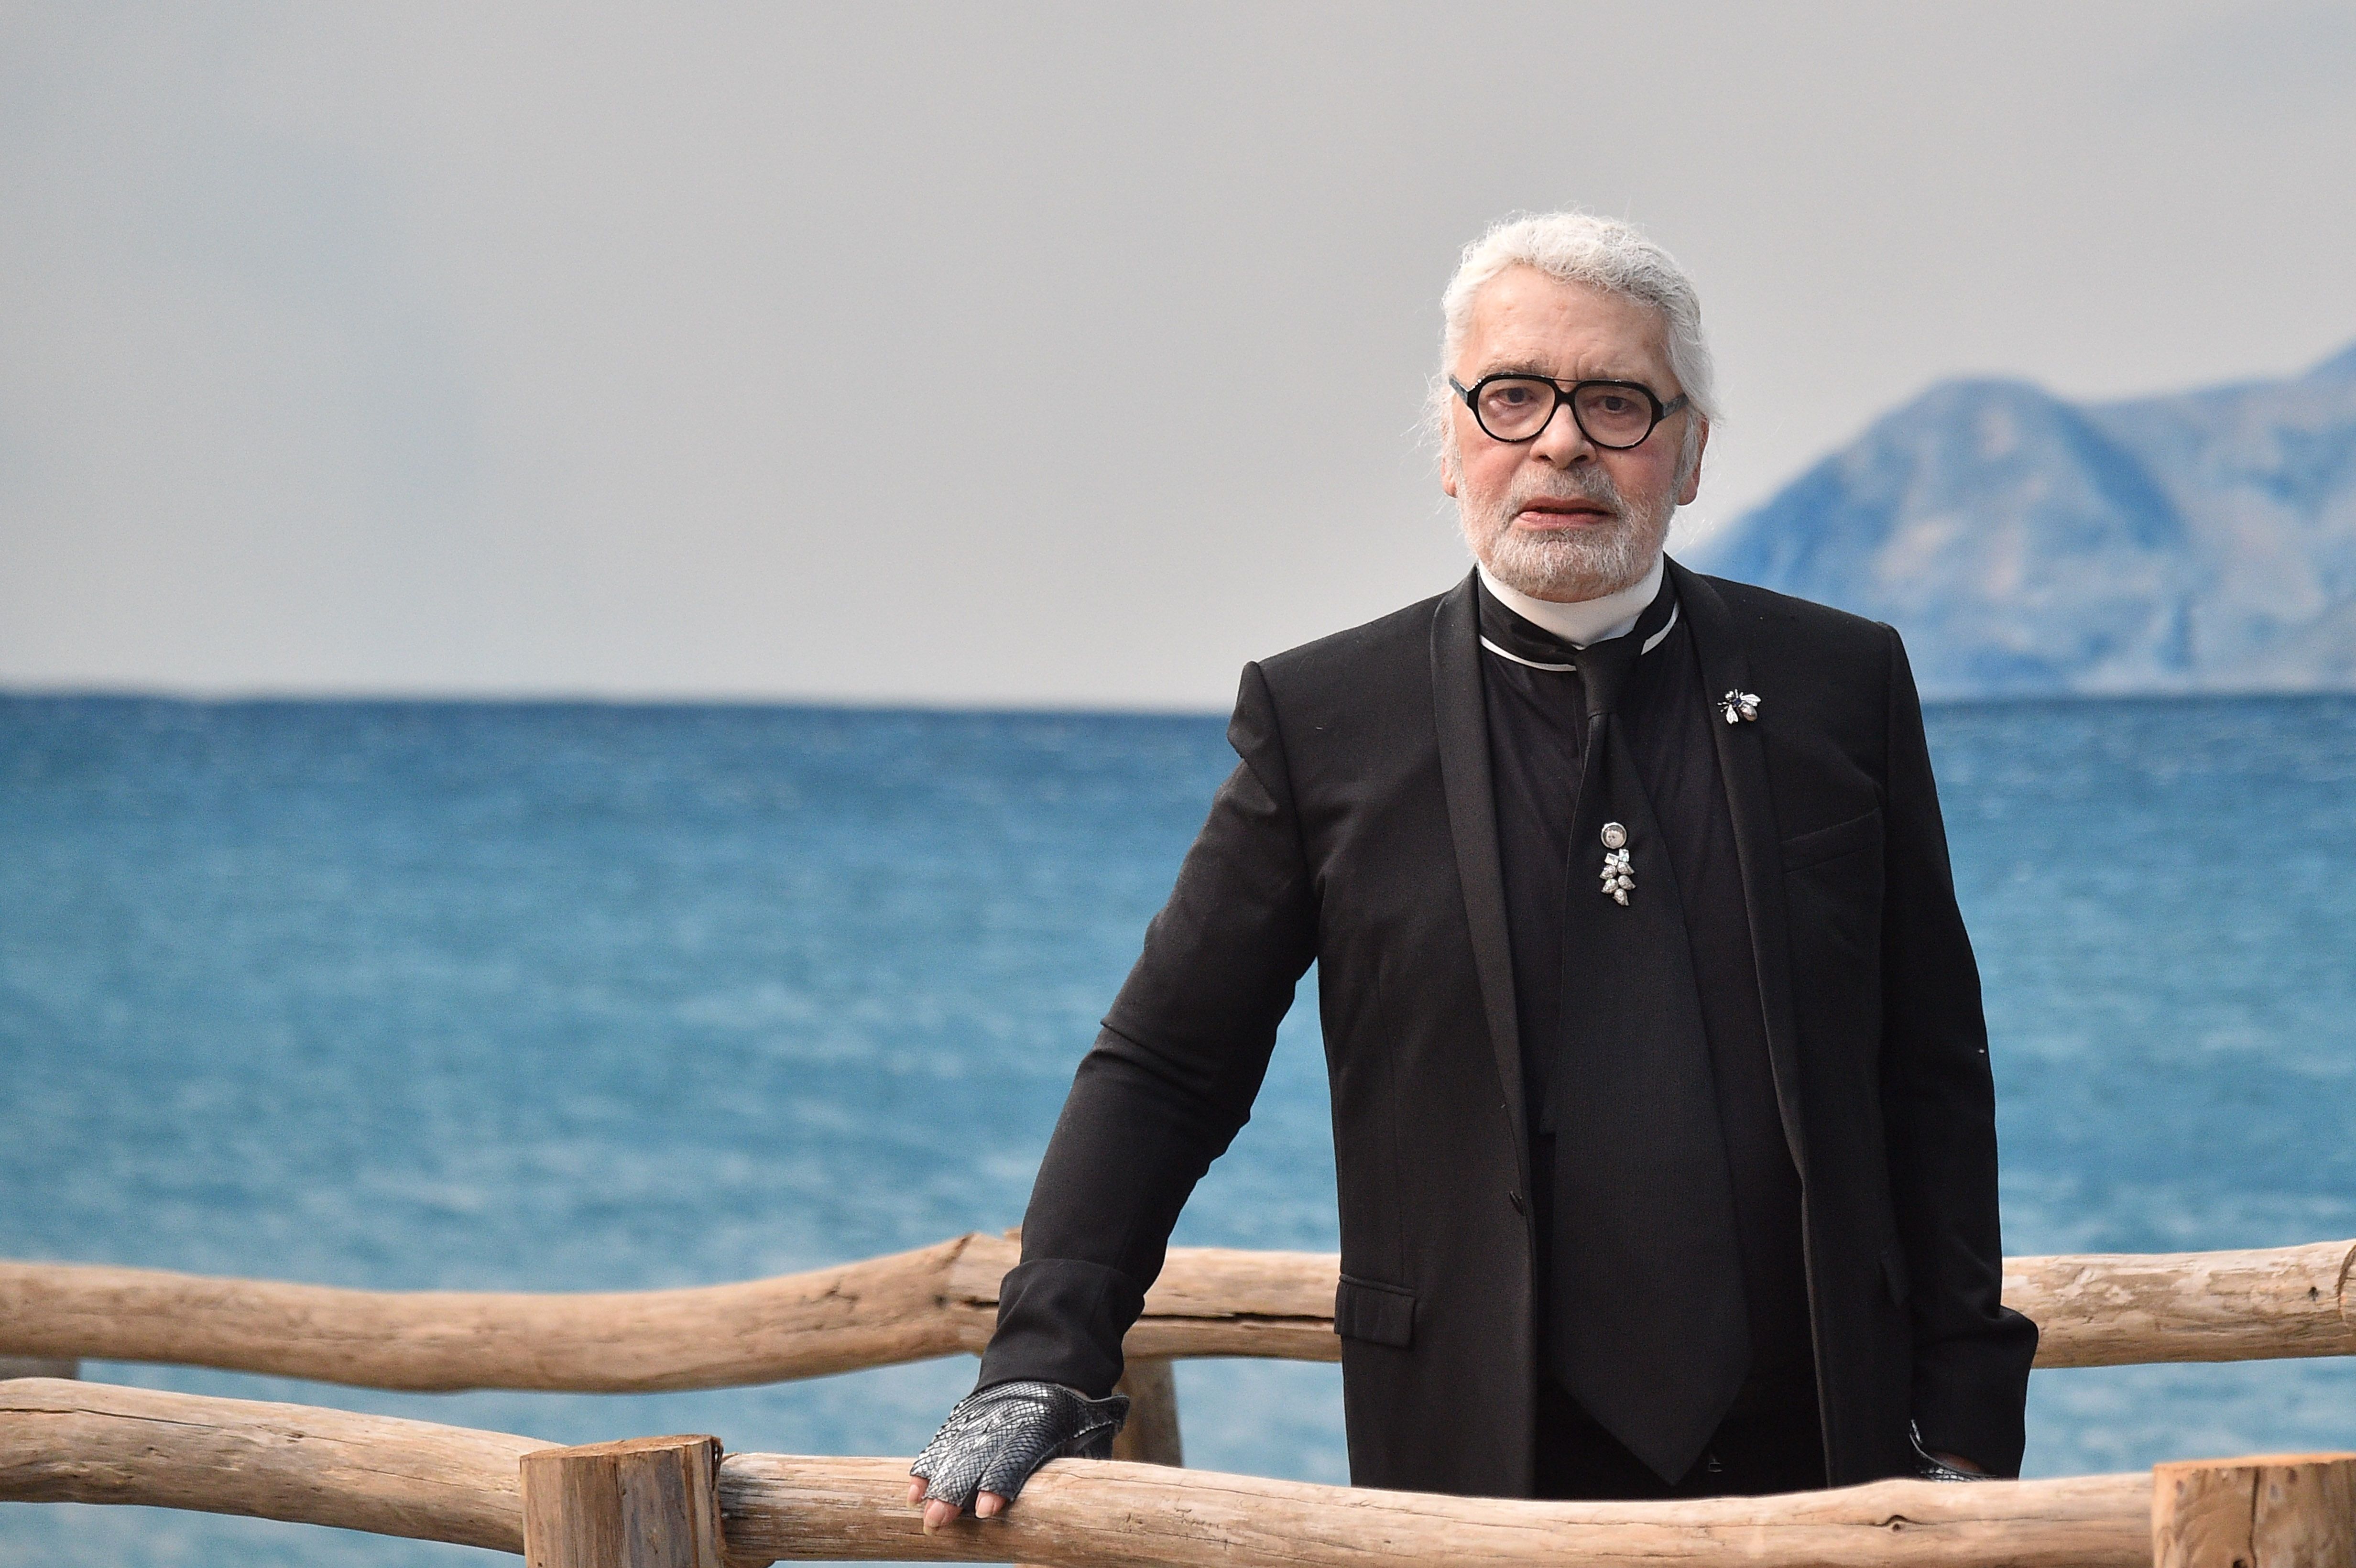 San Franciscans remember Karl Lagerfeld as a visionary designer and  influencer